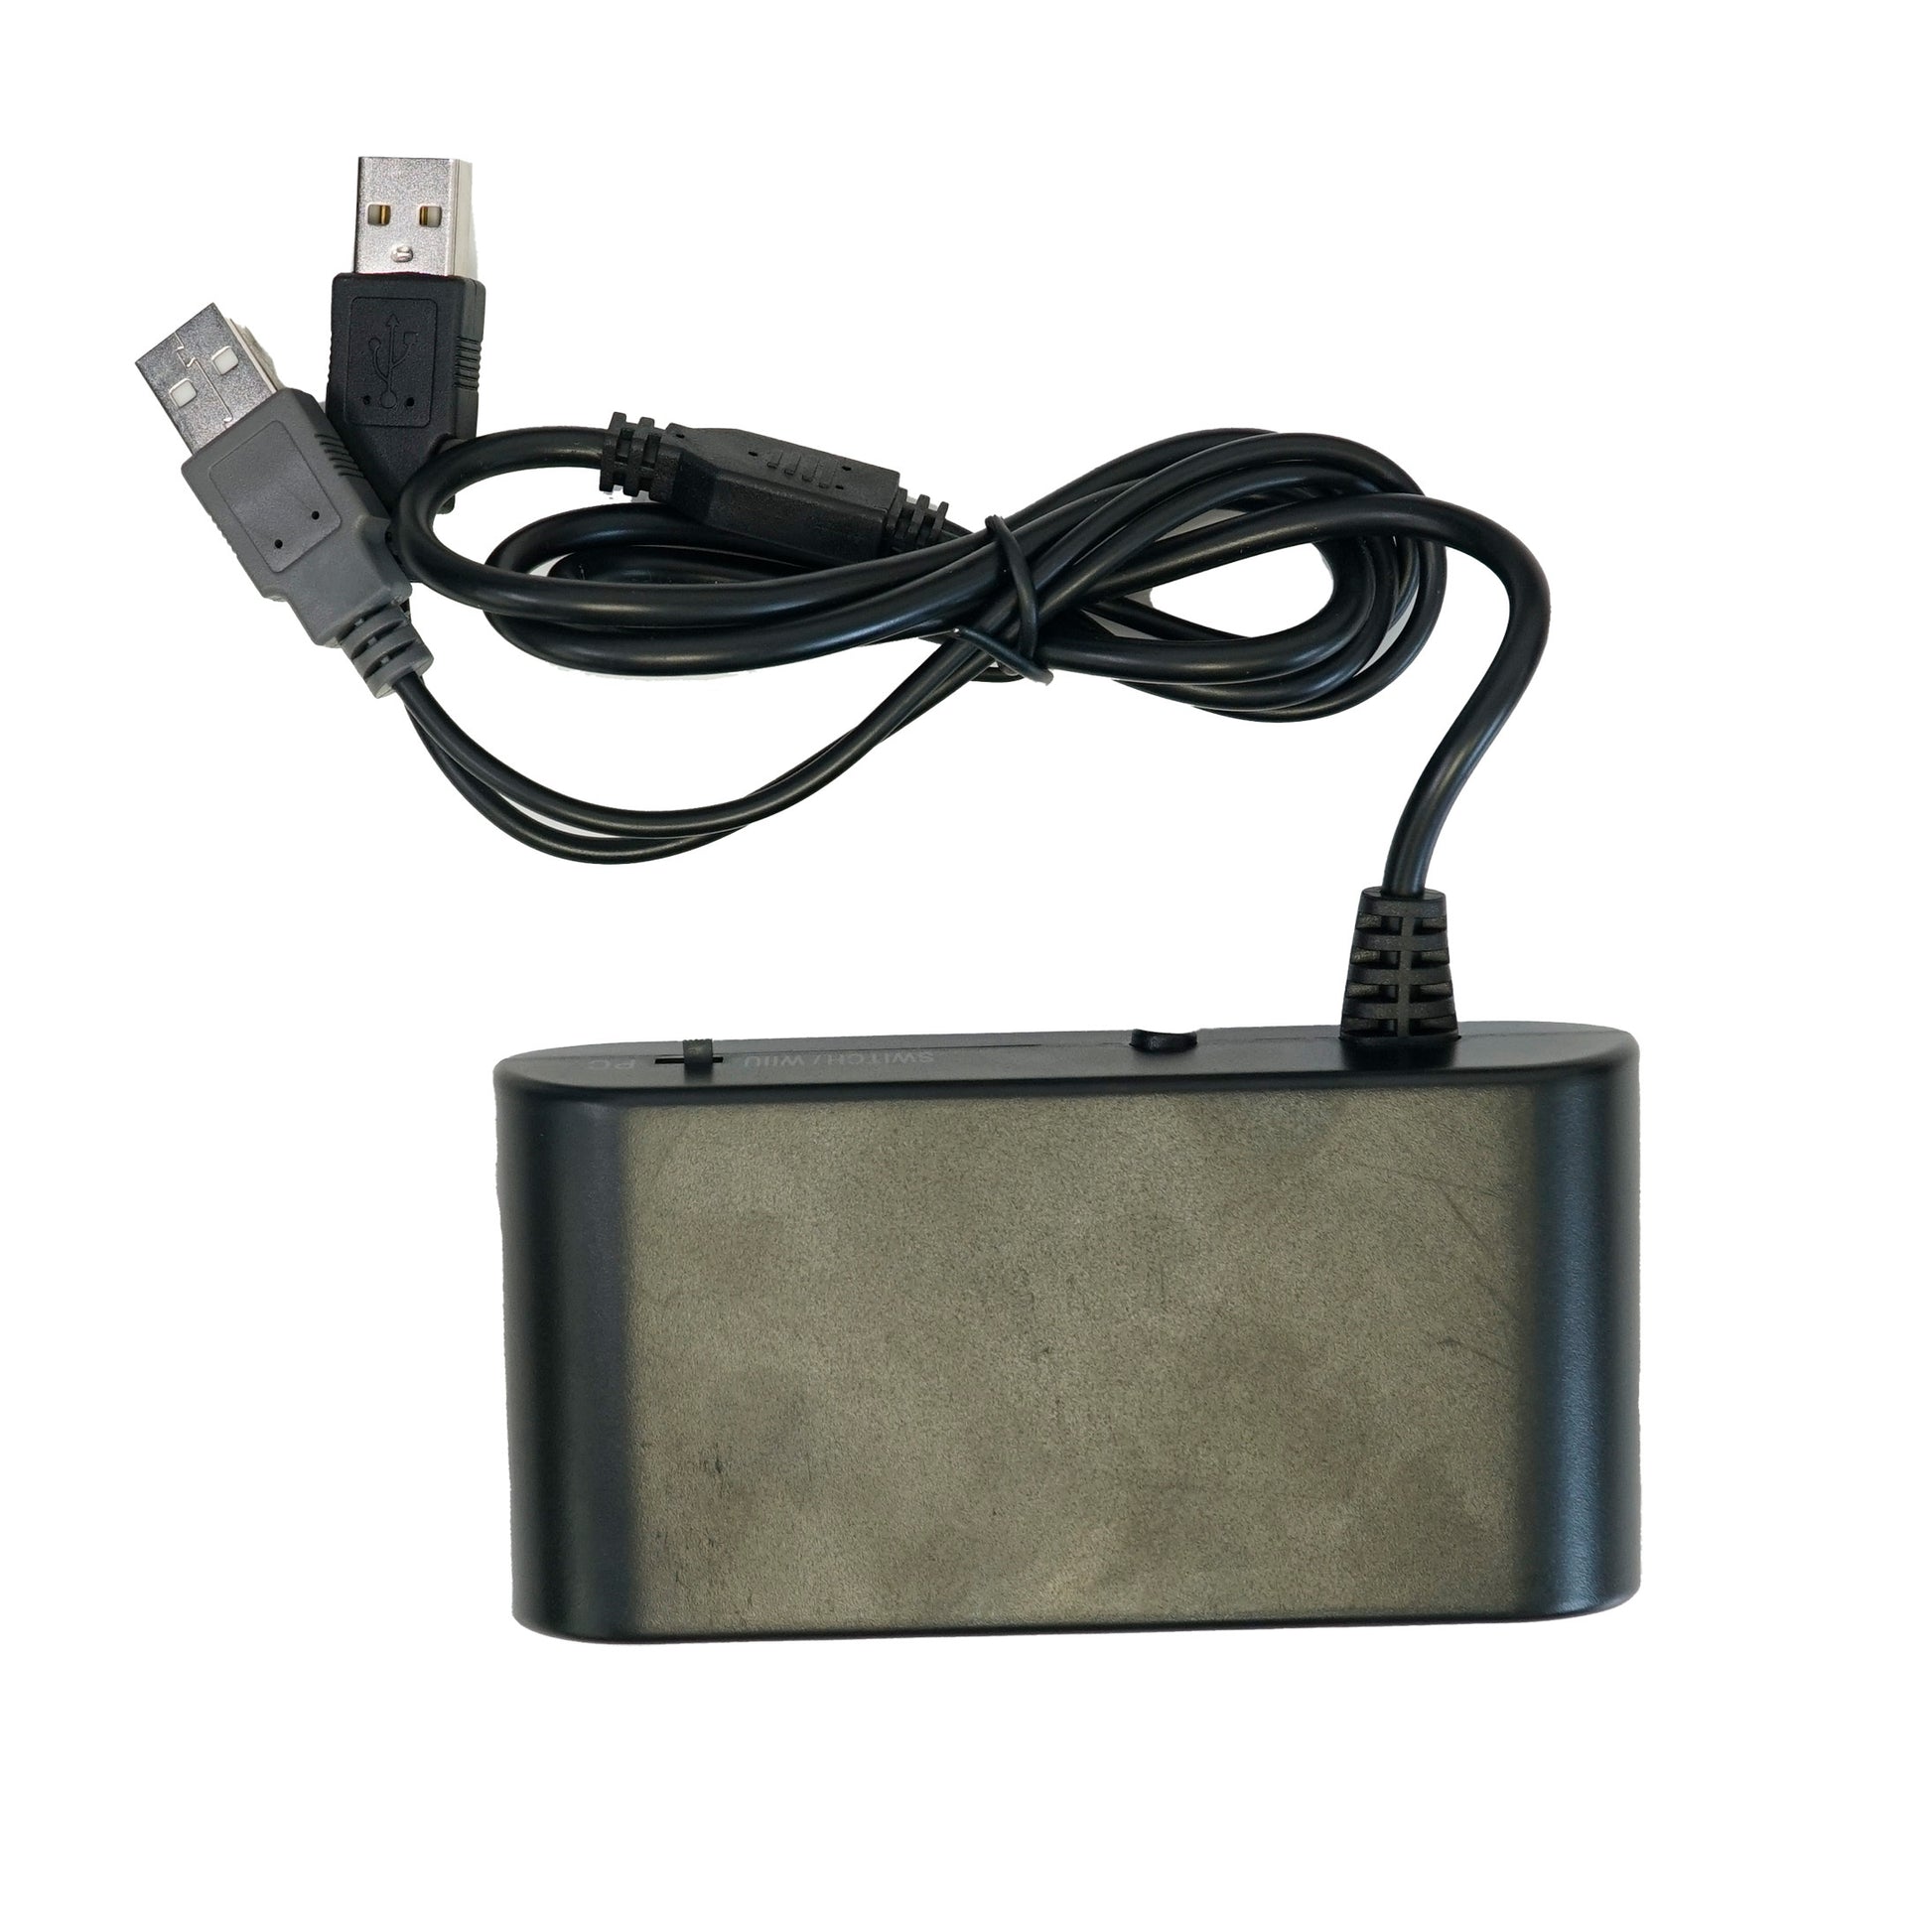 GameCube Controller Adapter for Nintendo Switch and PC - Updated 2022 Model Shenzhen Speed Sources Technology Co., Ltd.